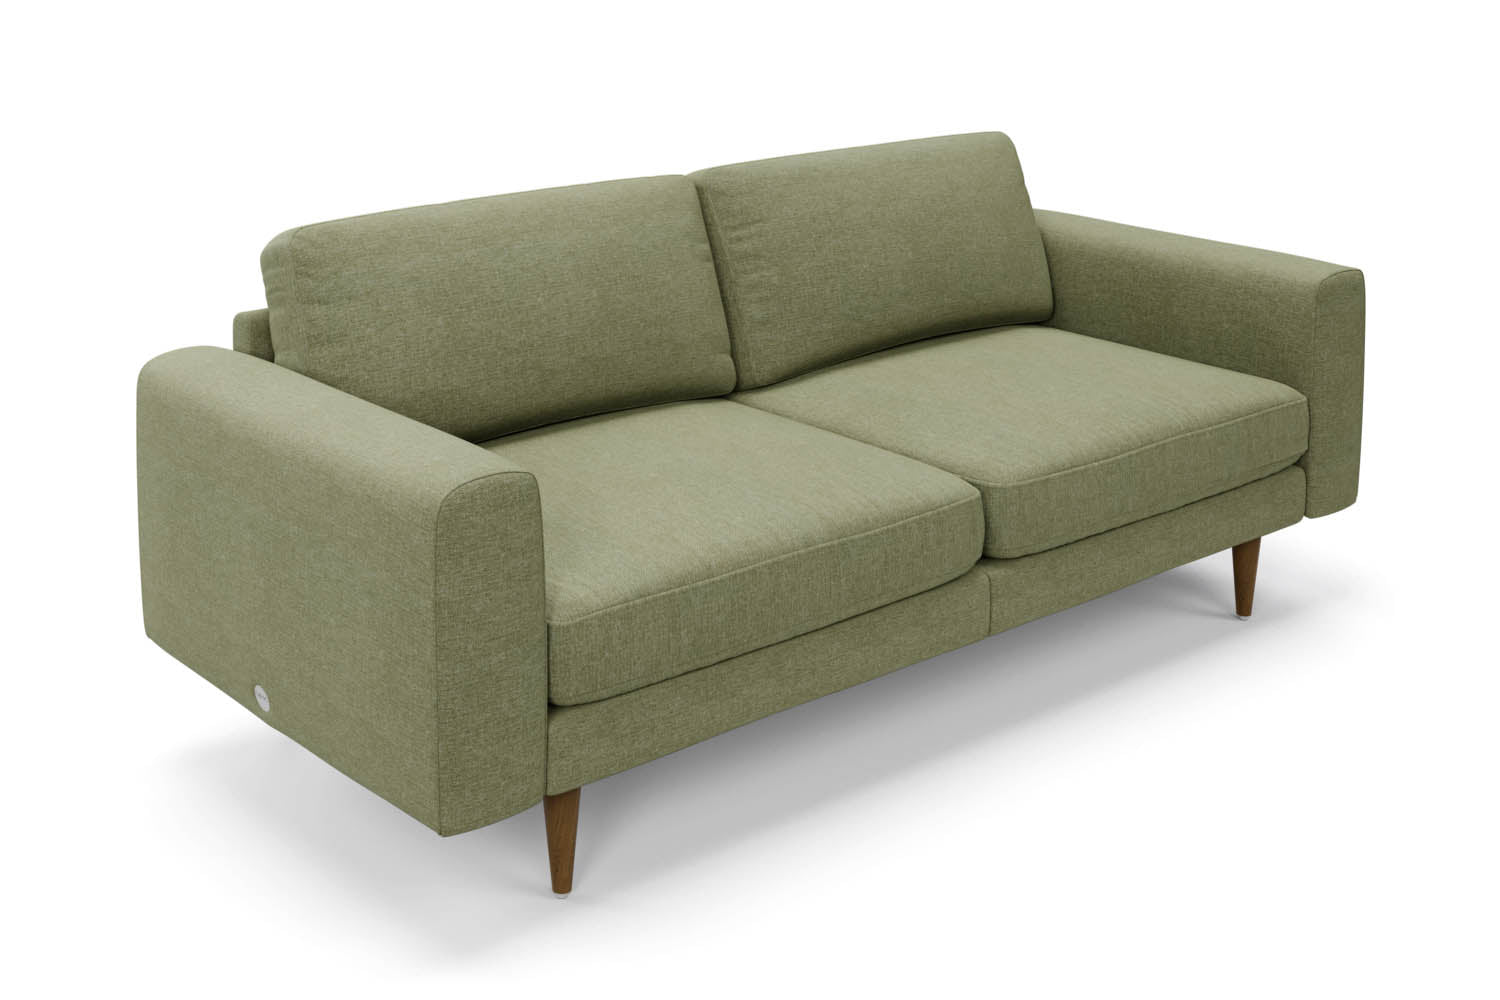 The Big Chill 3 Seater Sofa in Sage Chenille with brown legs